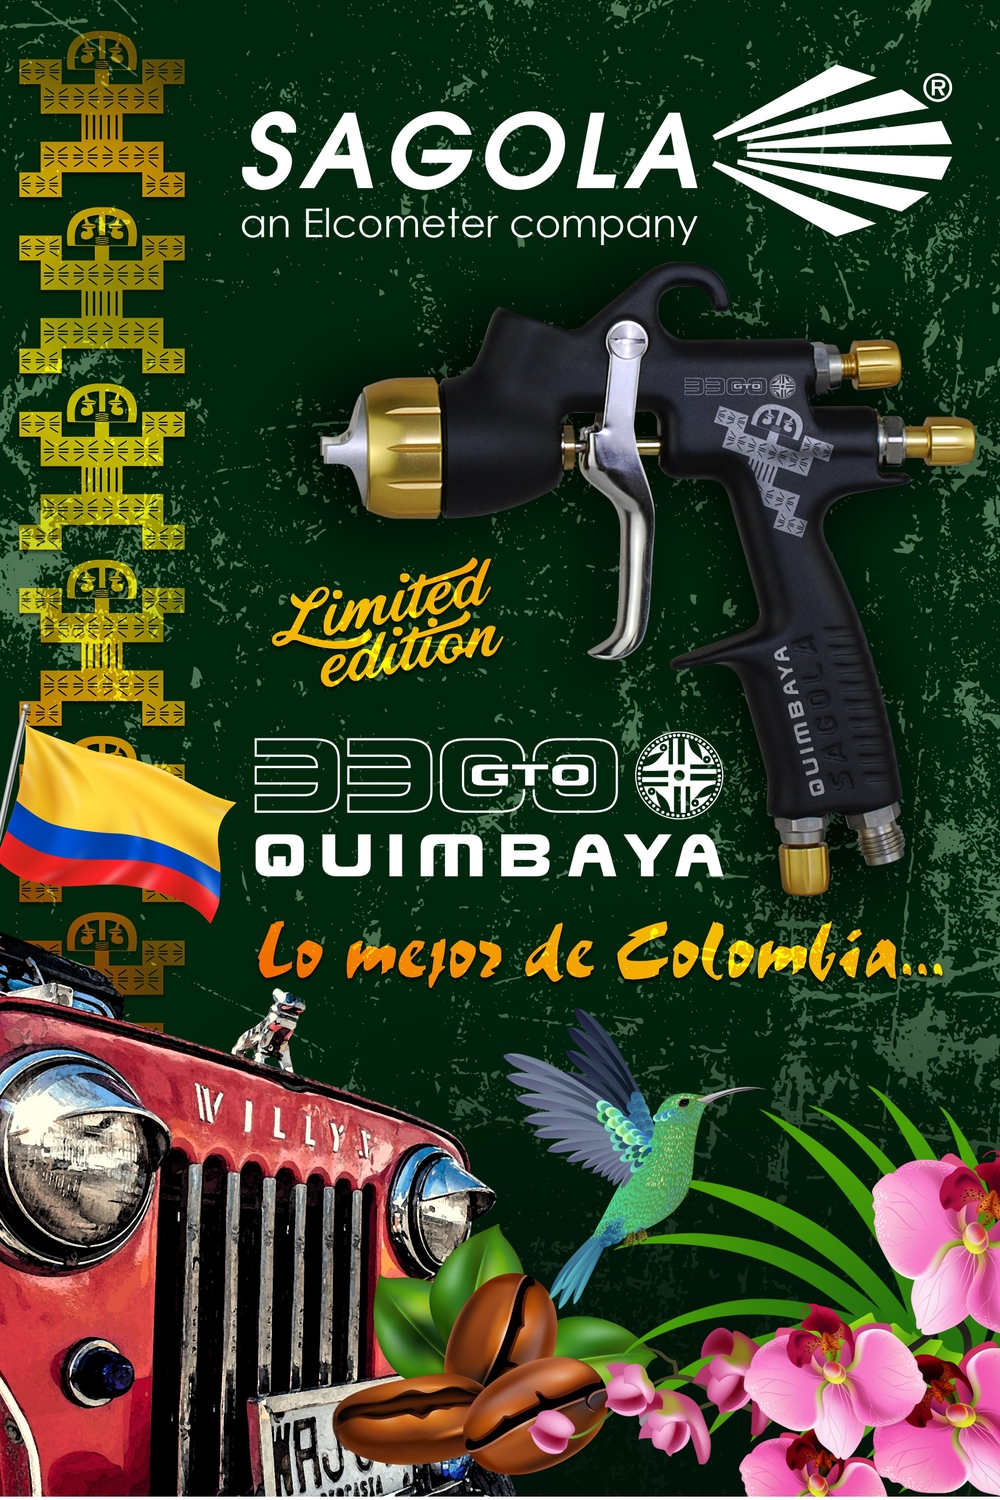 New 3300GTO QUIMBAYA, inspired in Colombia